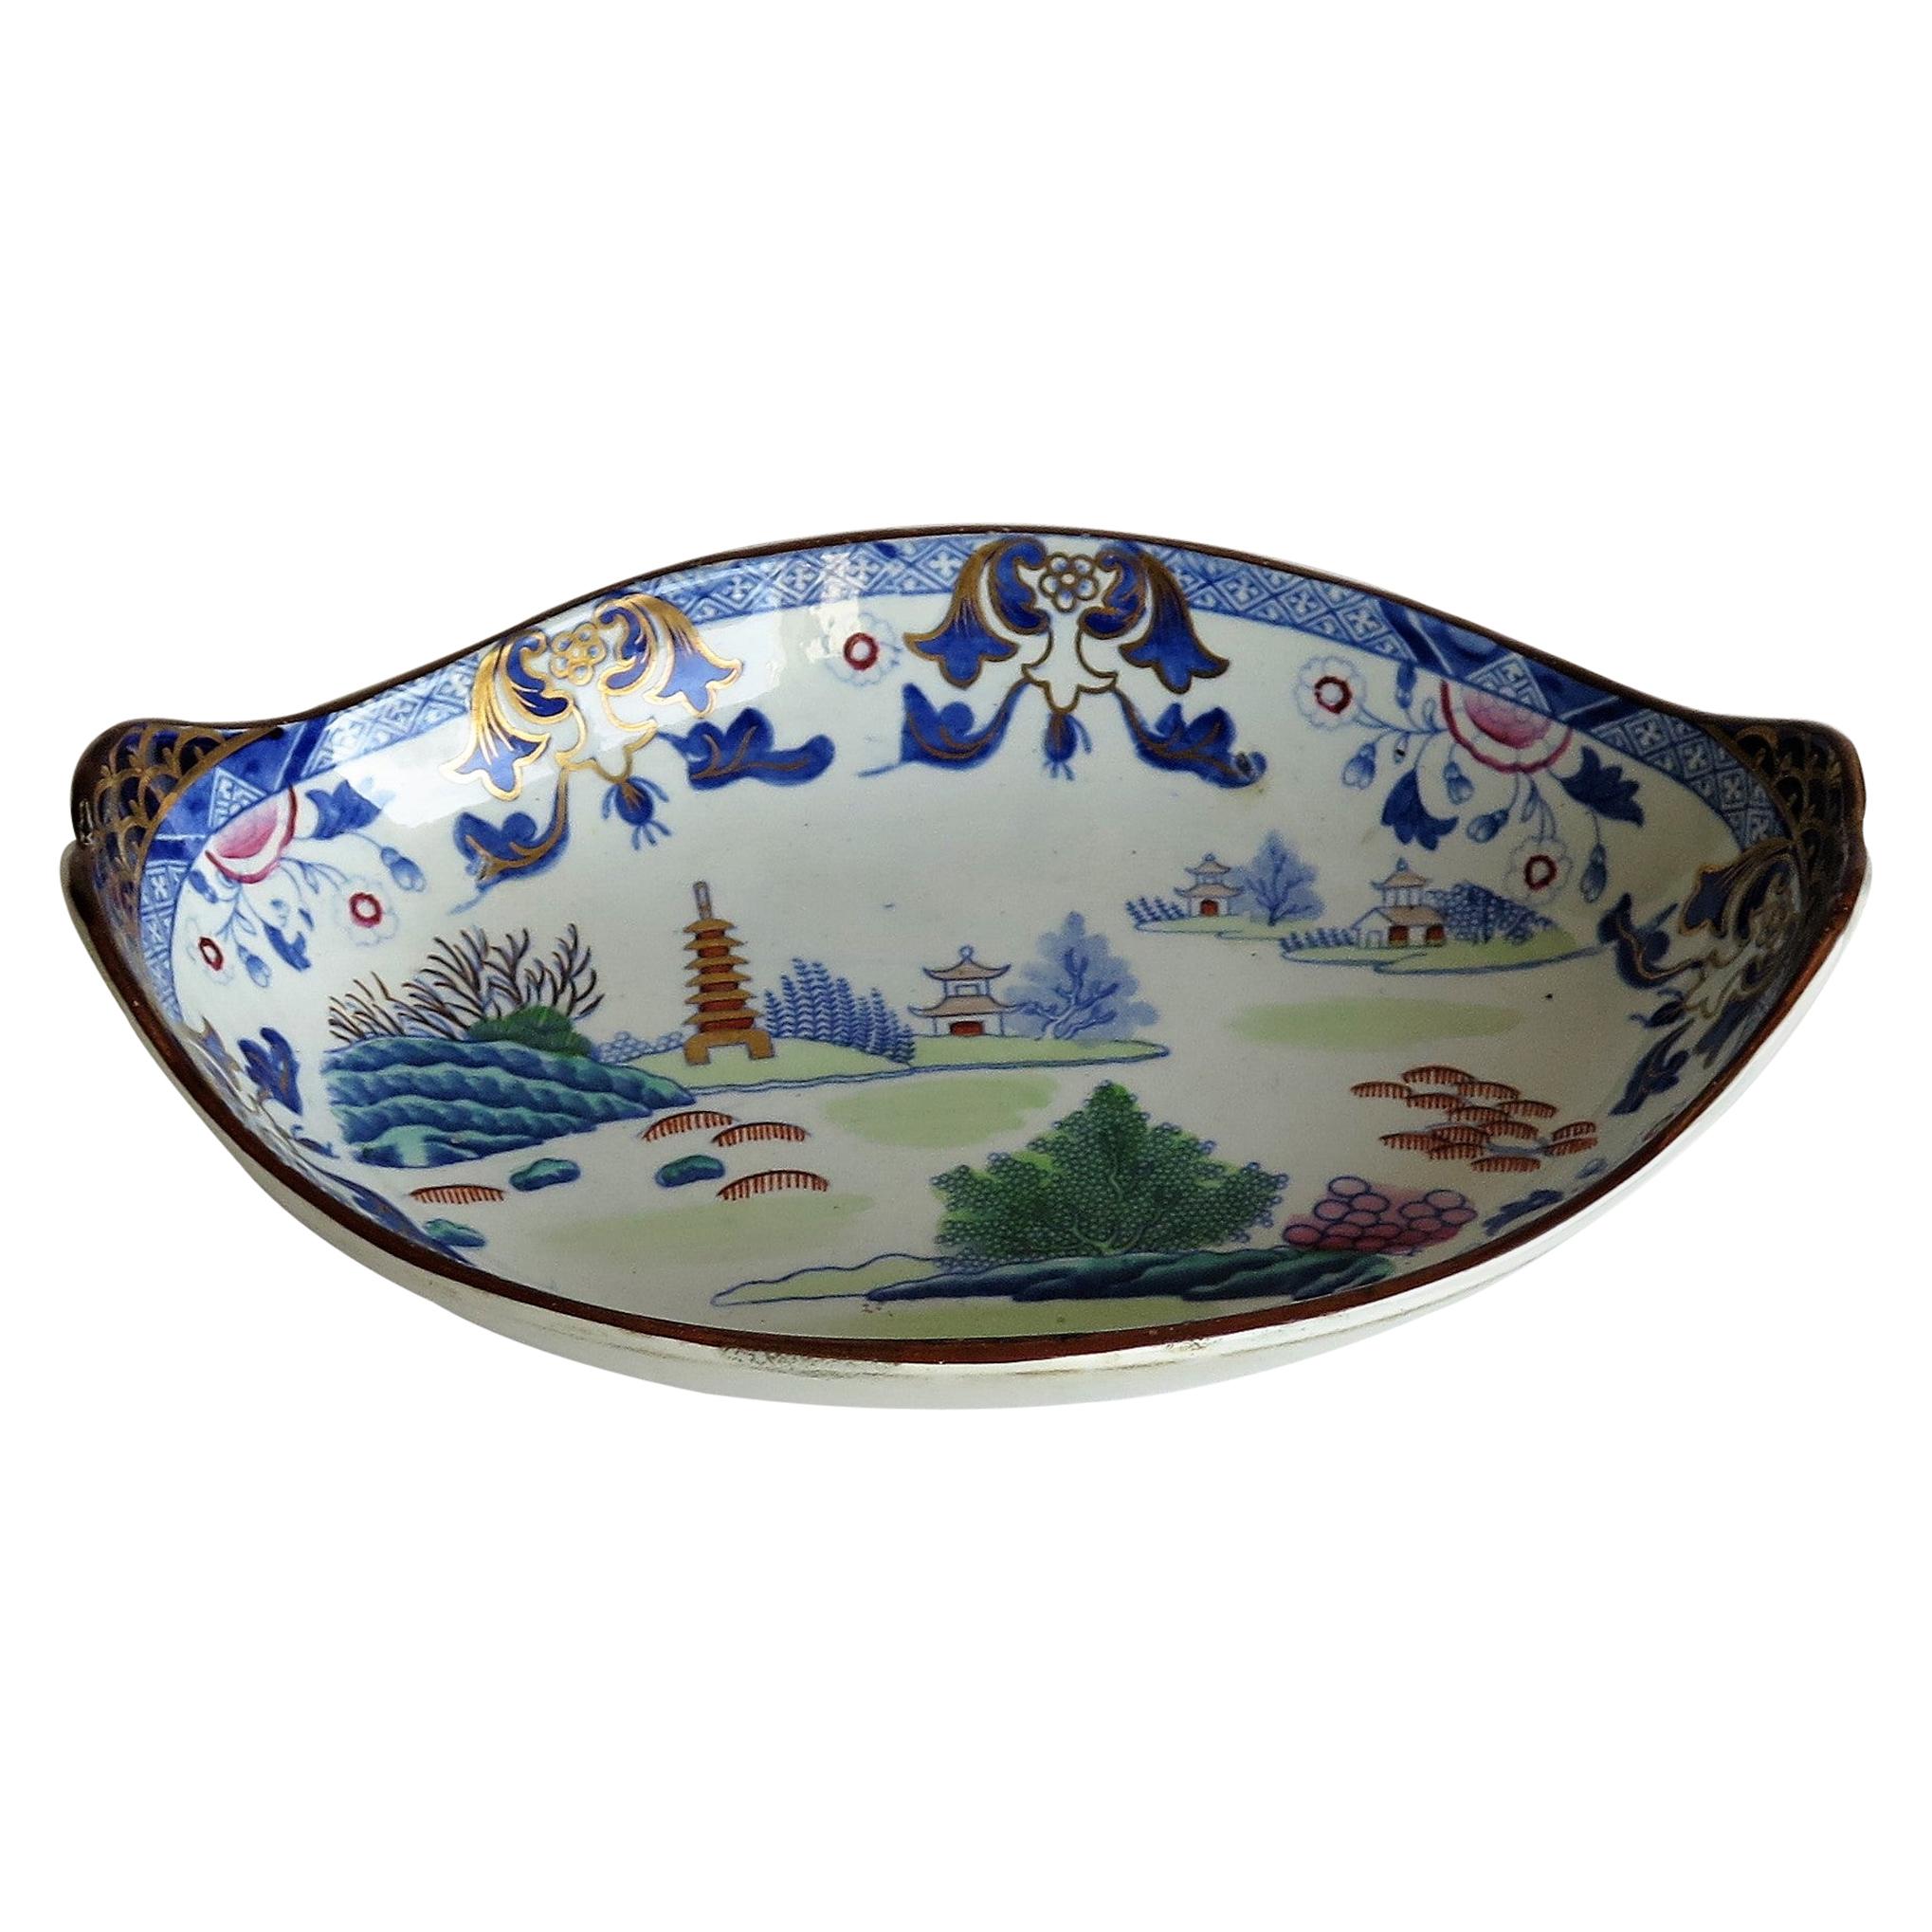 This is a good ironstone (stone china) Desert Dish, in the Chinese Landscape pattern, circa 1818, which we attribute to the factory of Hicks and Meigh of Shelton, Hanley, Staffordshire Potteries, England, who made good quality earthenware and